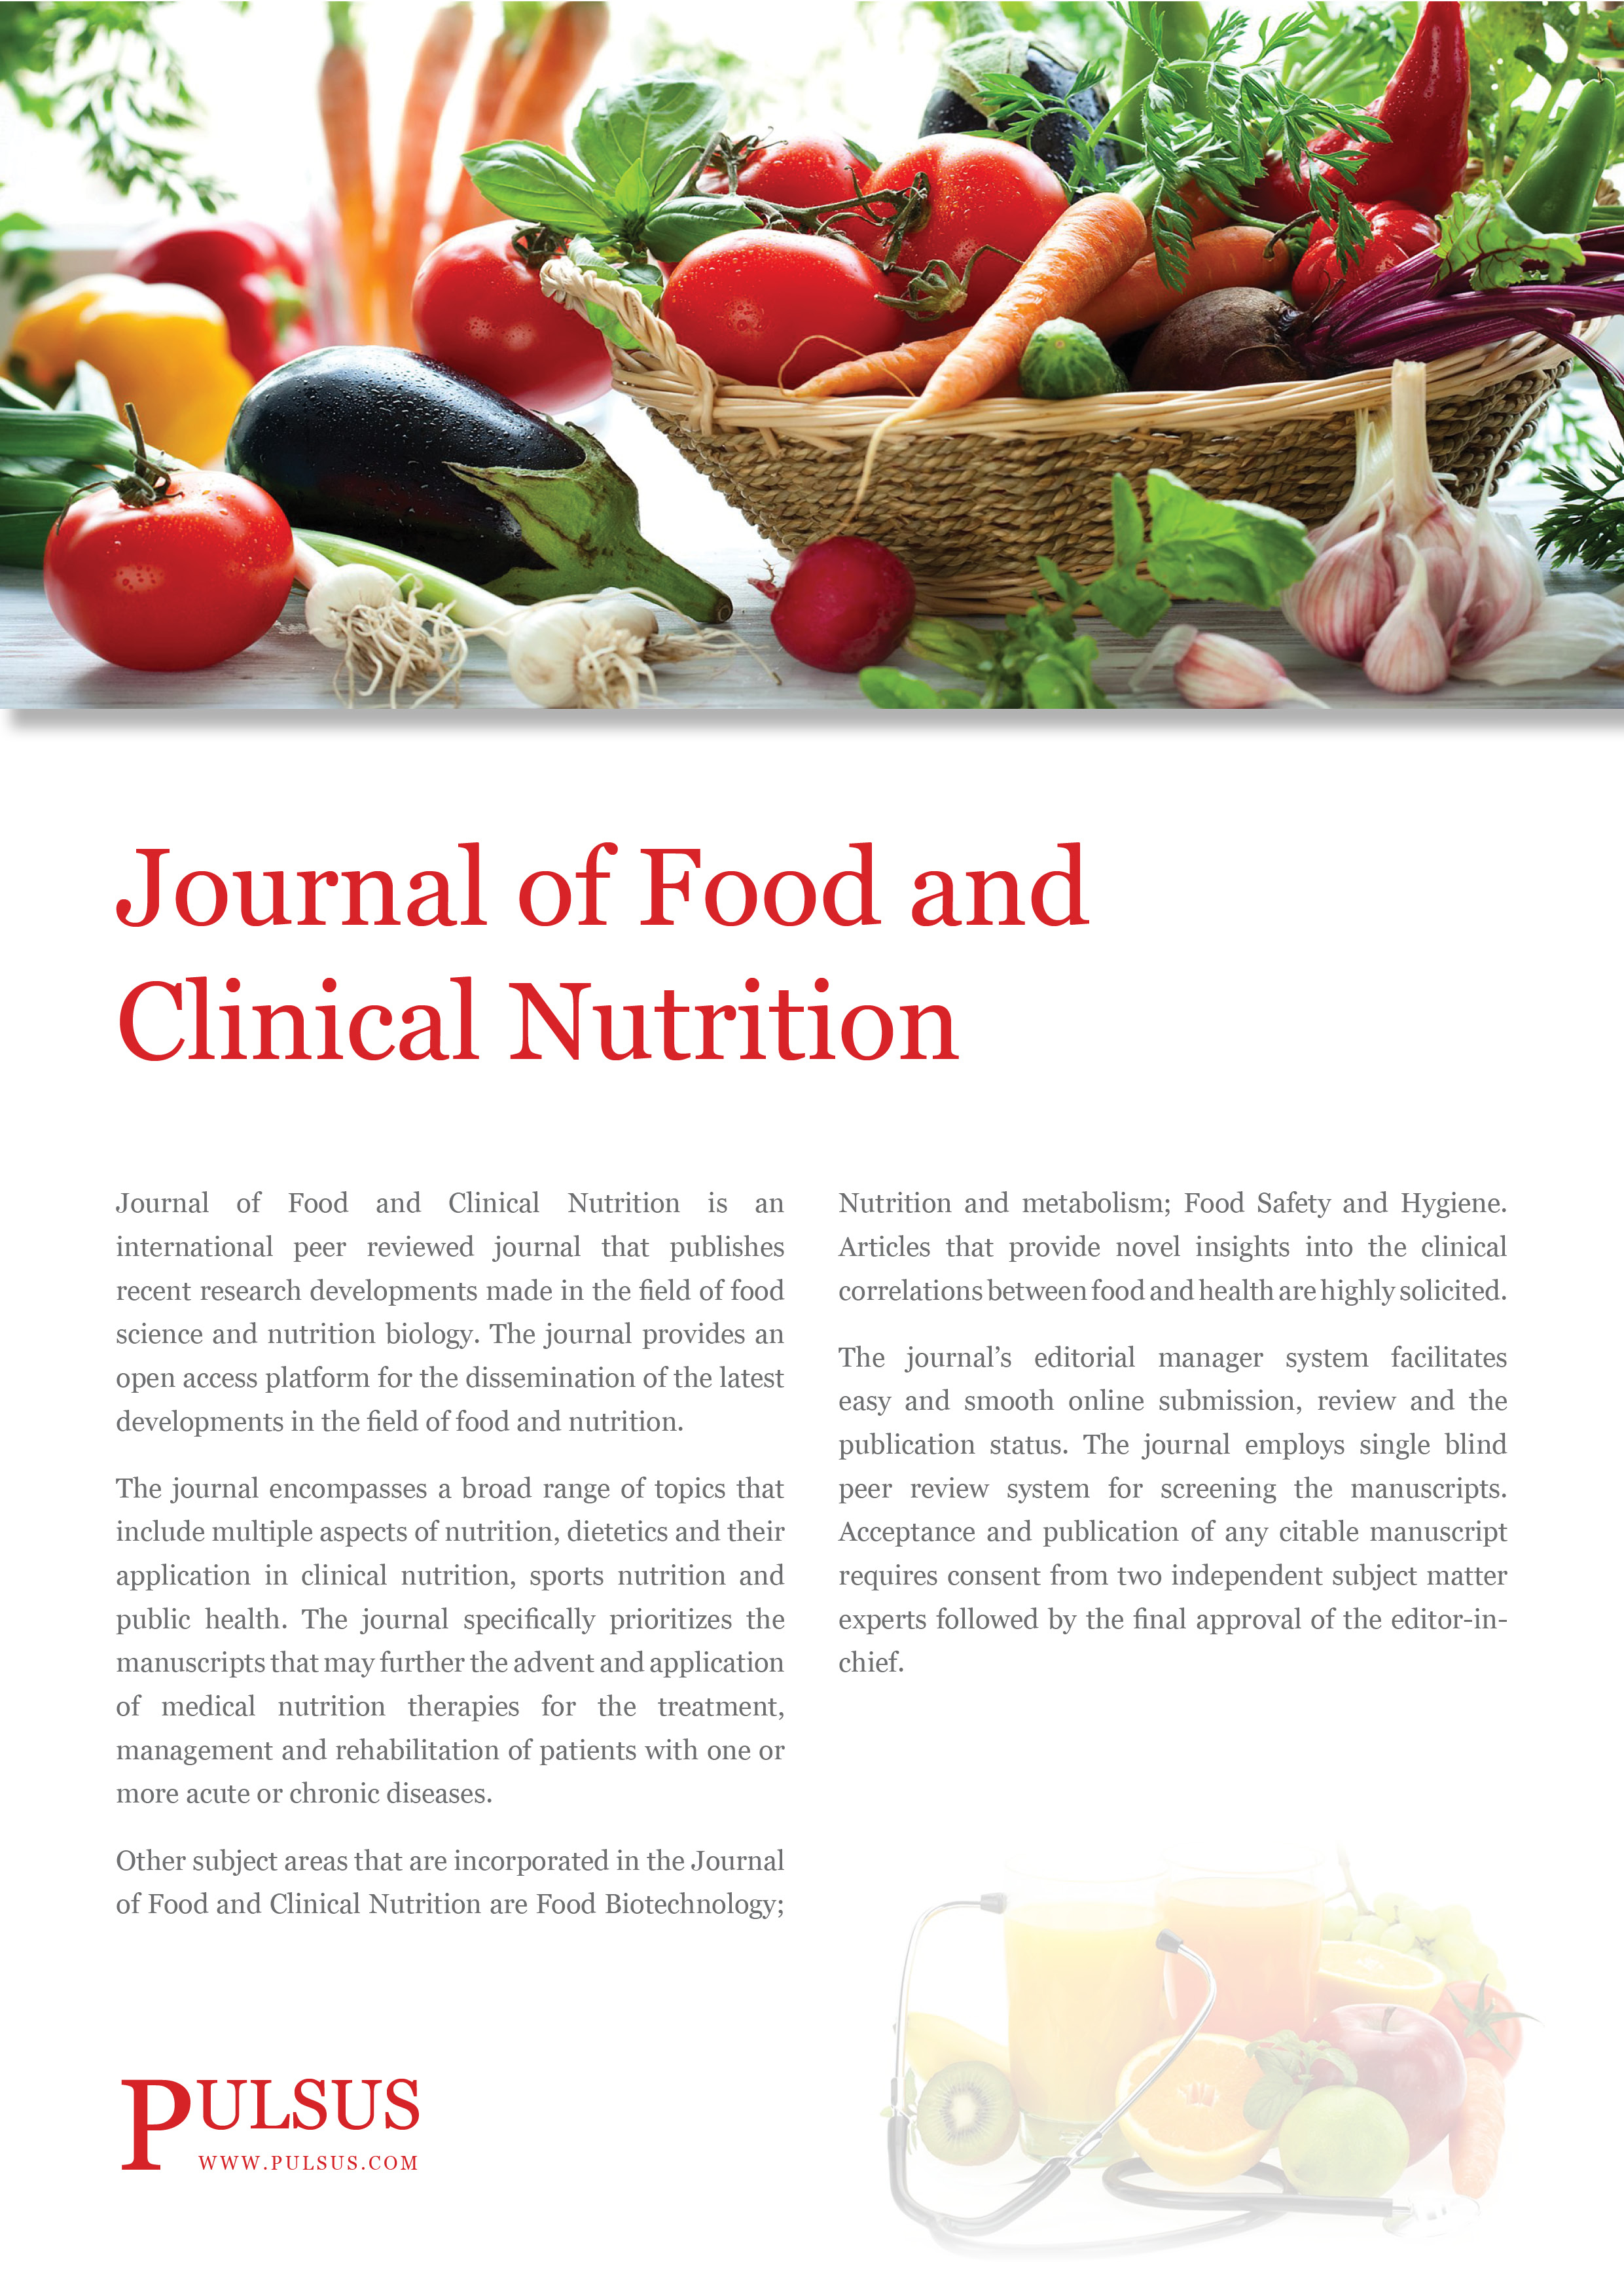 Journal of Food and Clinical Nutrition